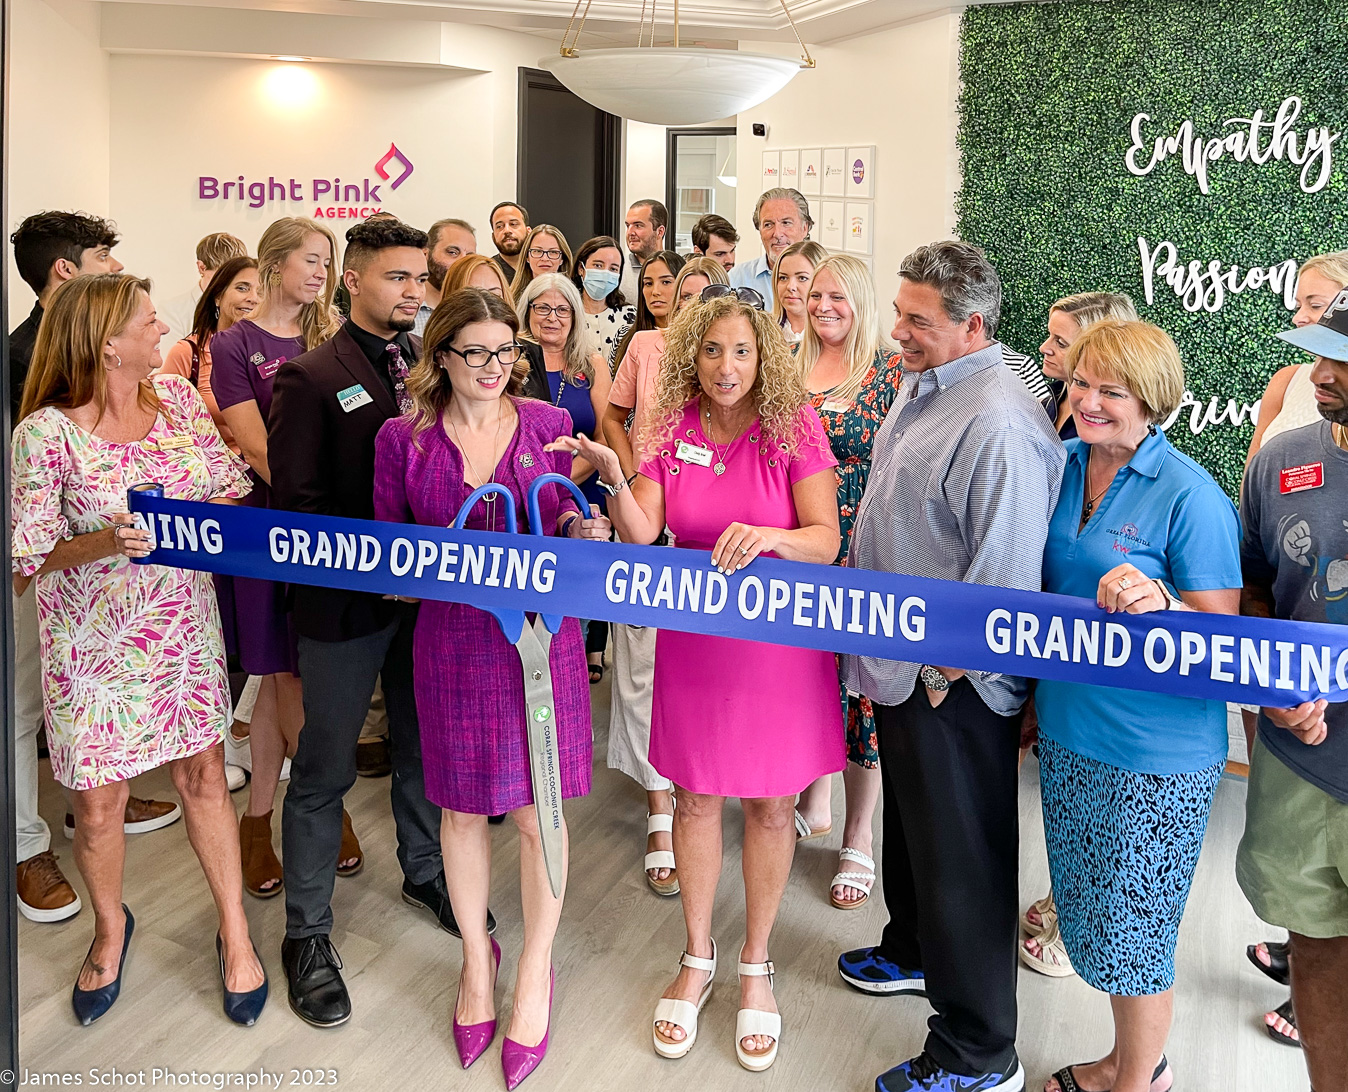 Bright Pink Agency staff and friends at grand opening of office in Coral Springs